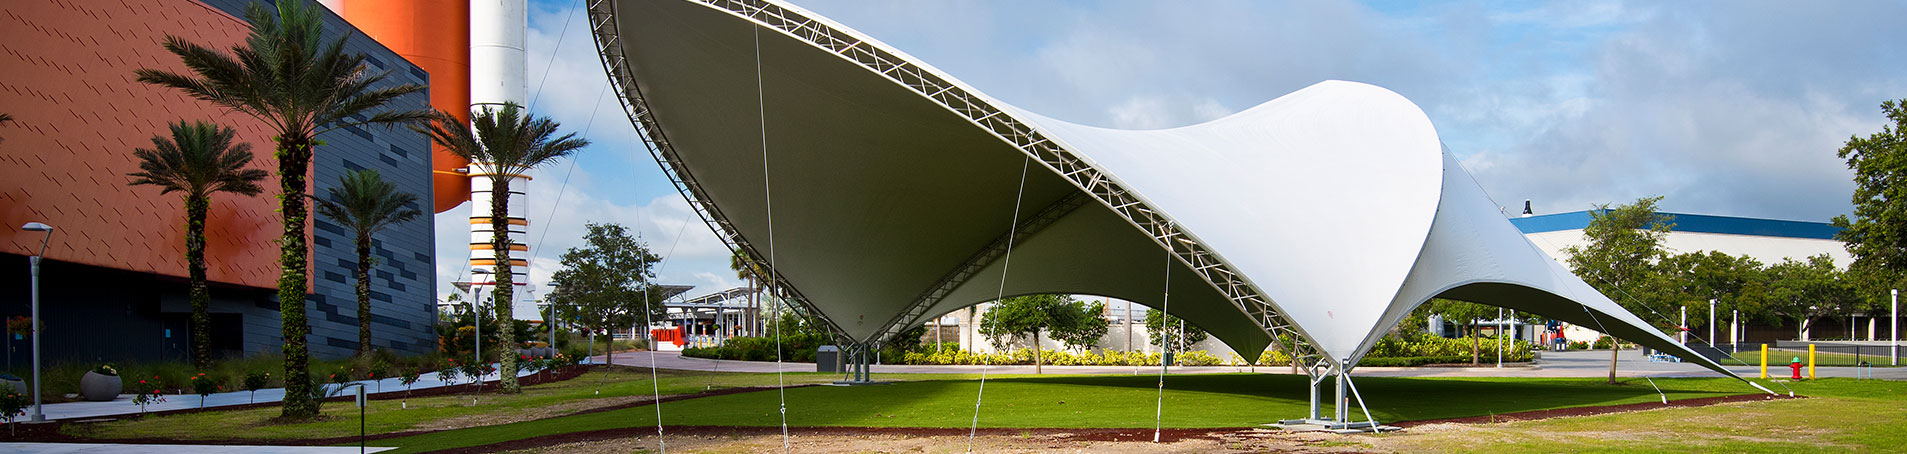 Host your private event in the fresh Florida air and sunshine beneath the Atlantis pavilion at this unique venue.